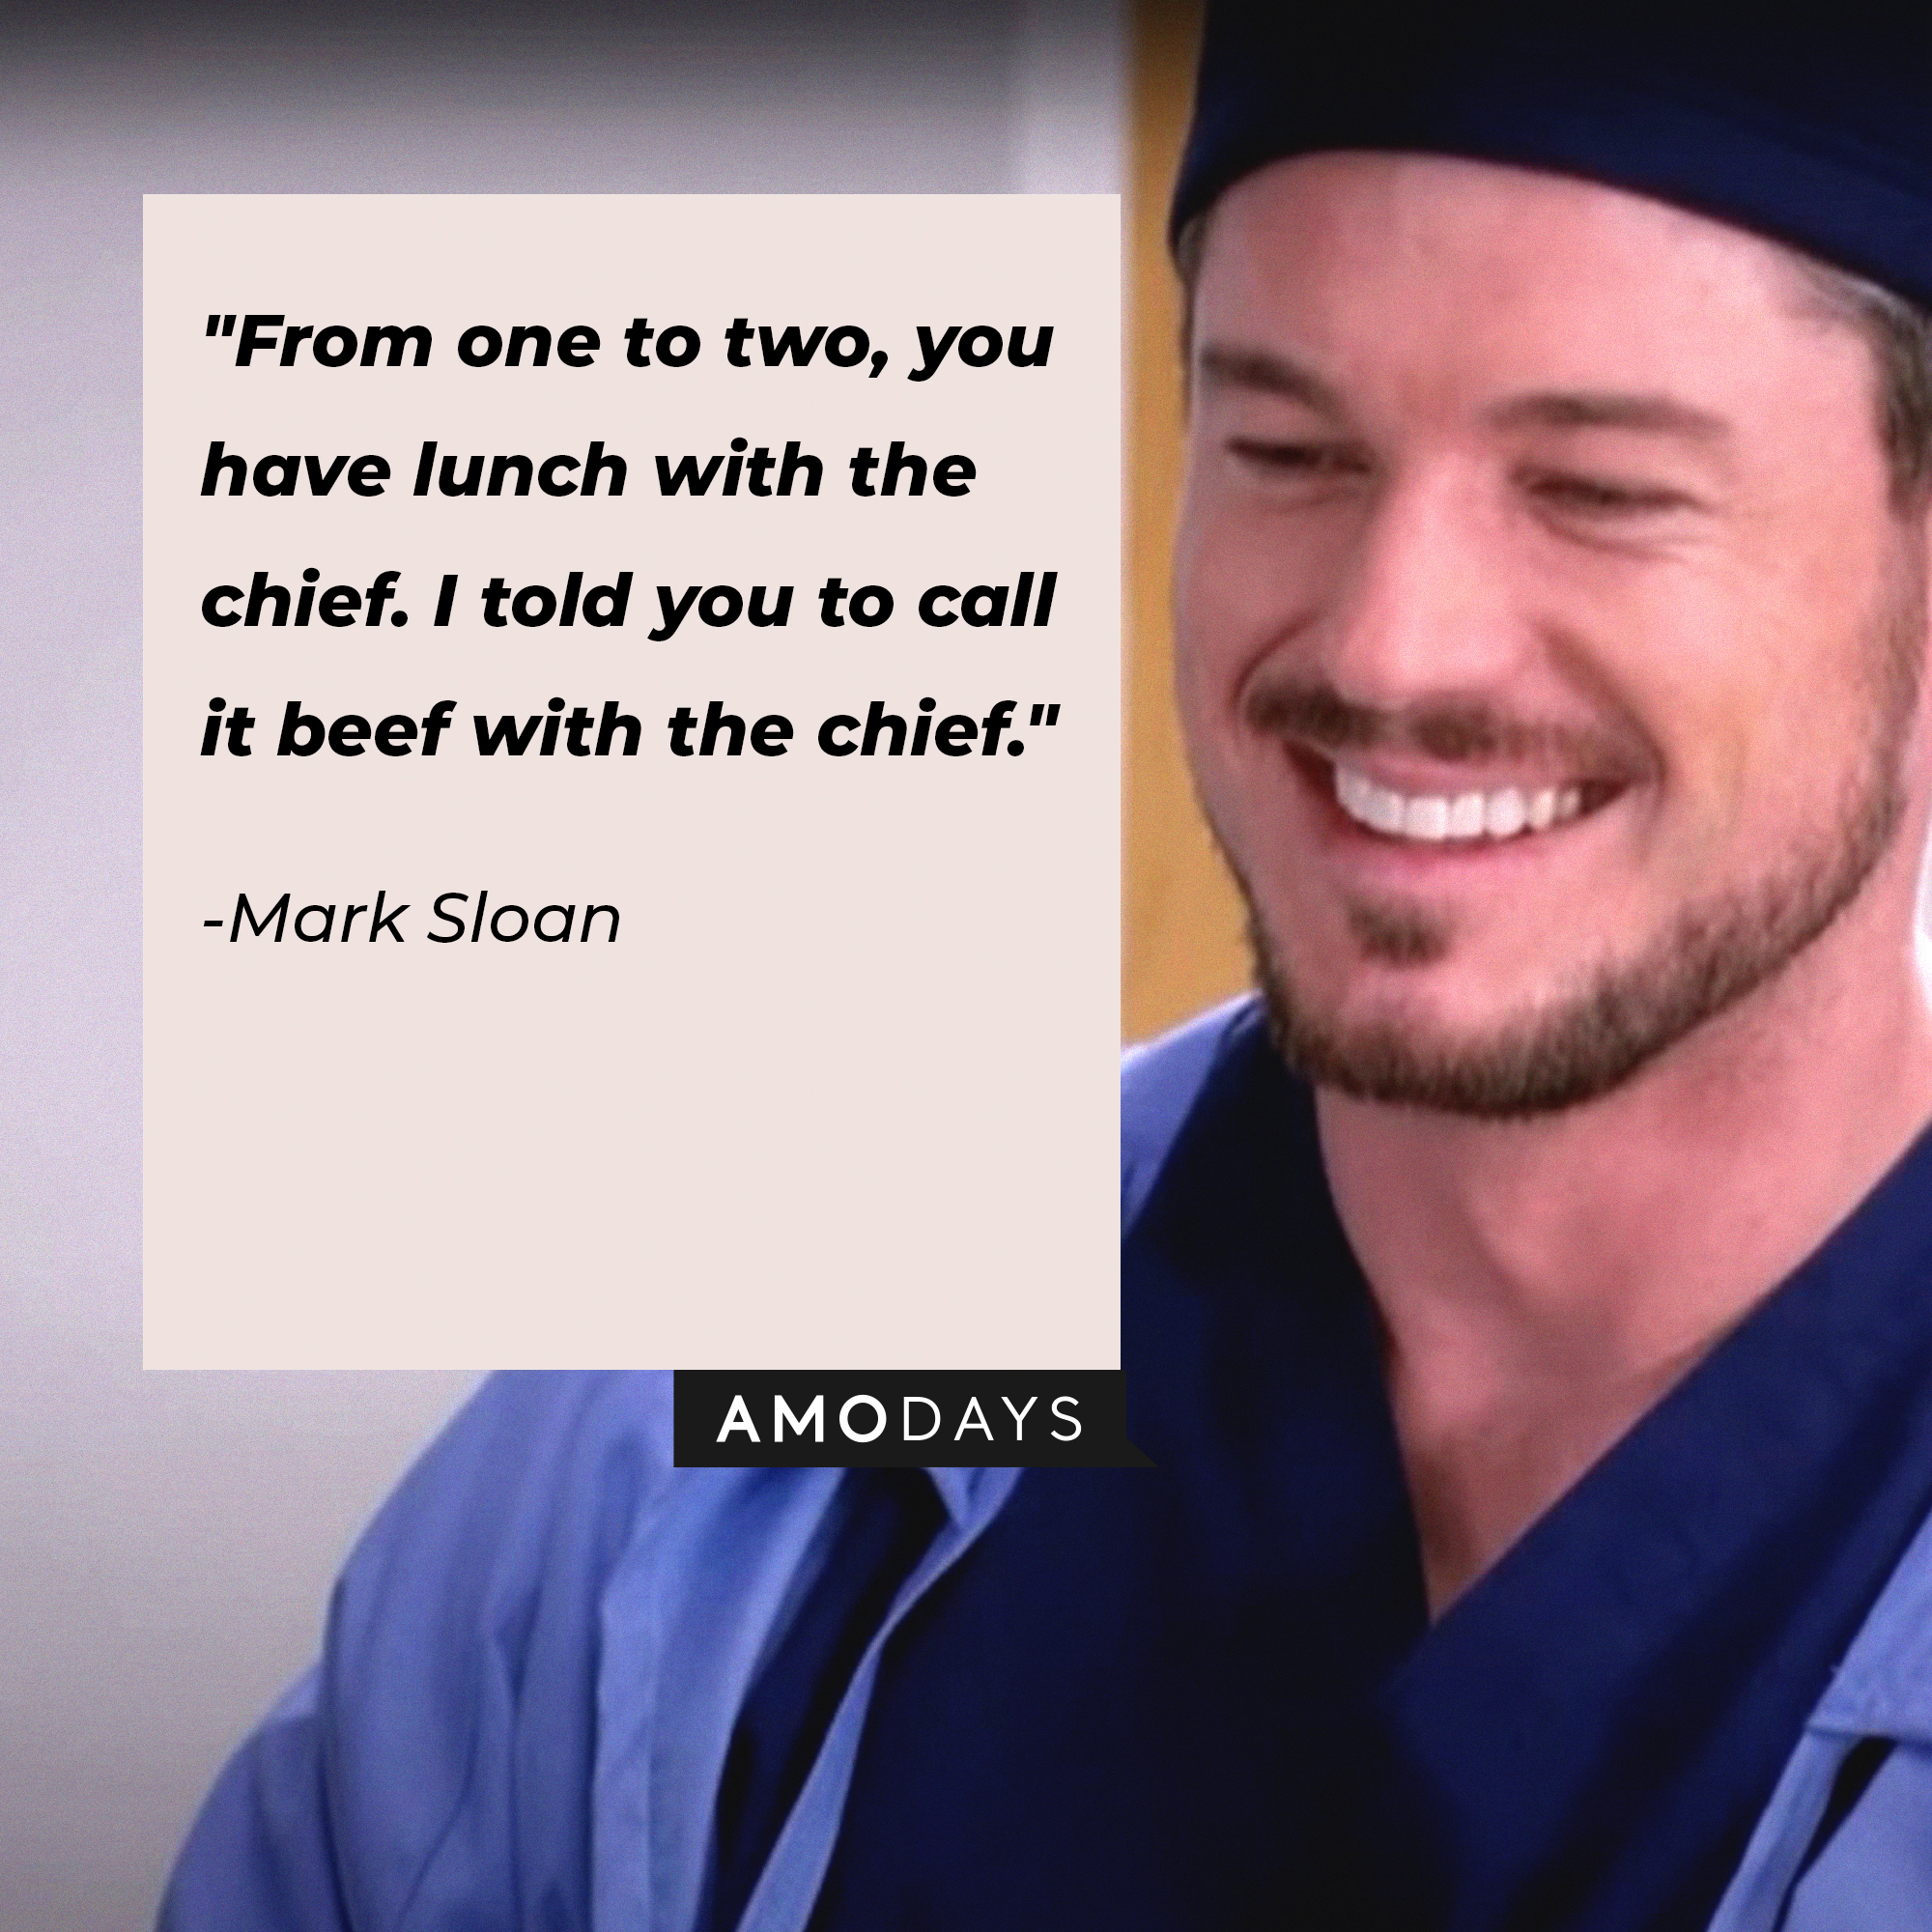 Mark Sloan's quote: "From one to two, you have lunch with the chief. I told you to call it beef with the chief." | Image: AmoDays